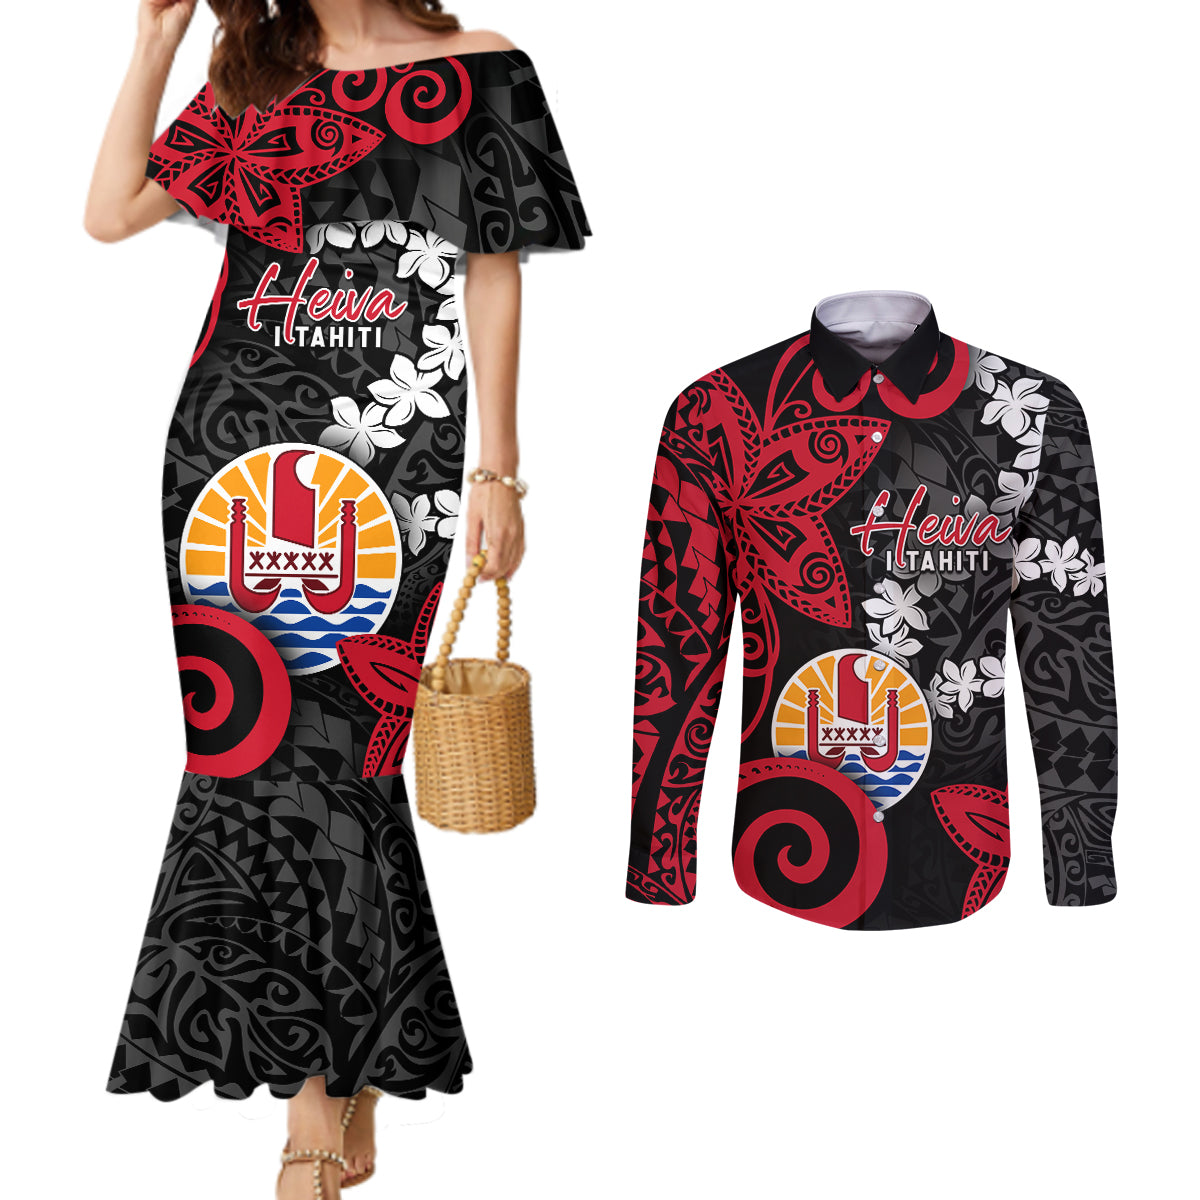 Tahiti Heiva Festival Couples Matching Mermaid Dress and Long Sleeve Button Shirt Floral Pattern With Coat Of Arms